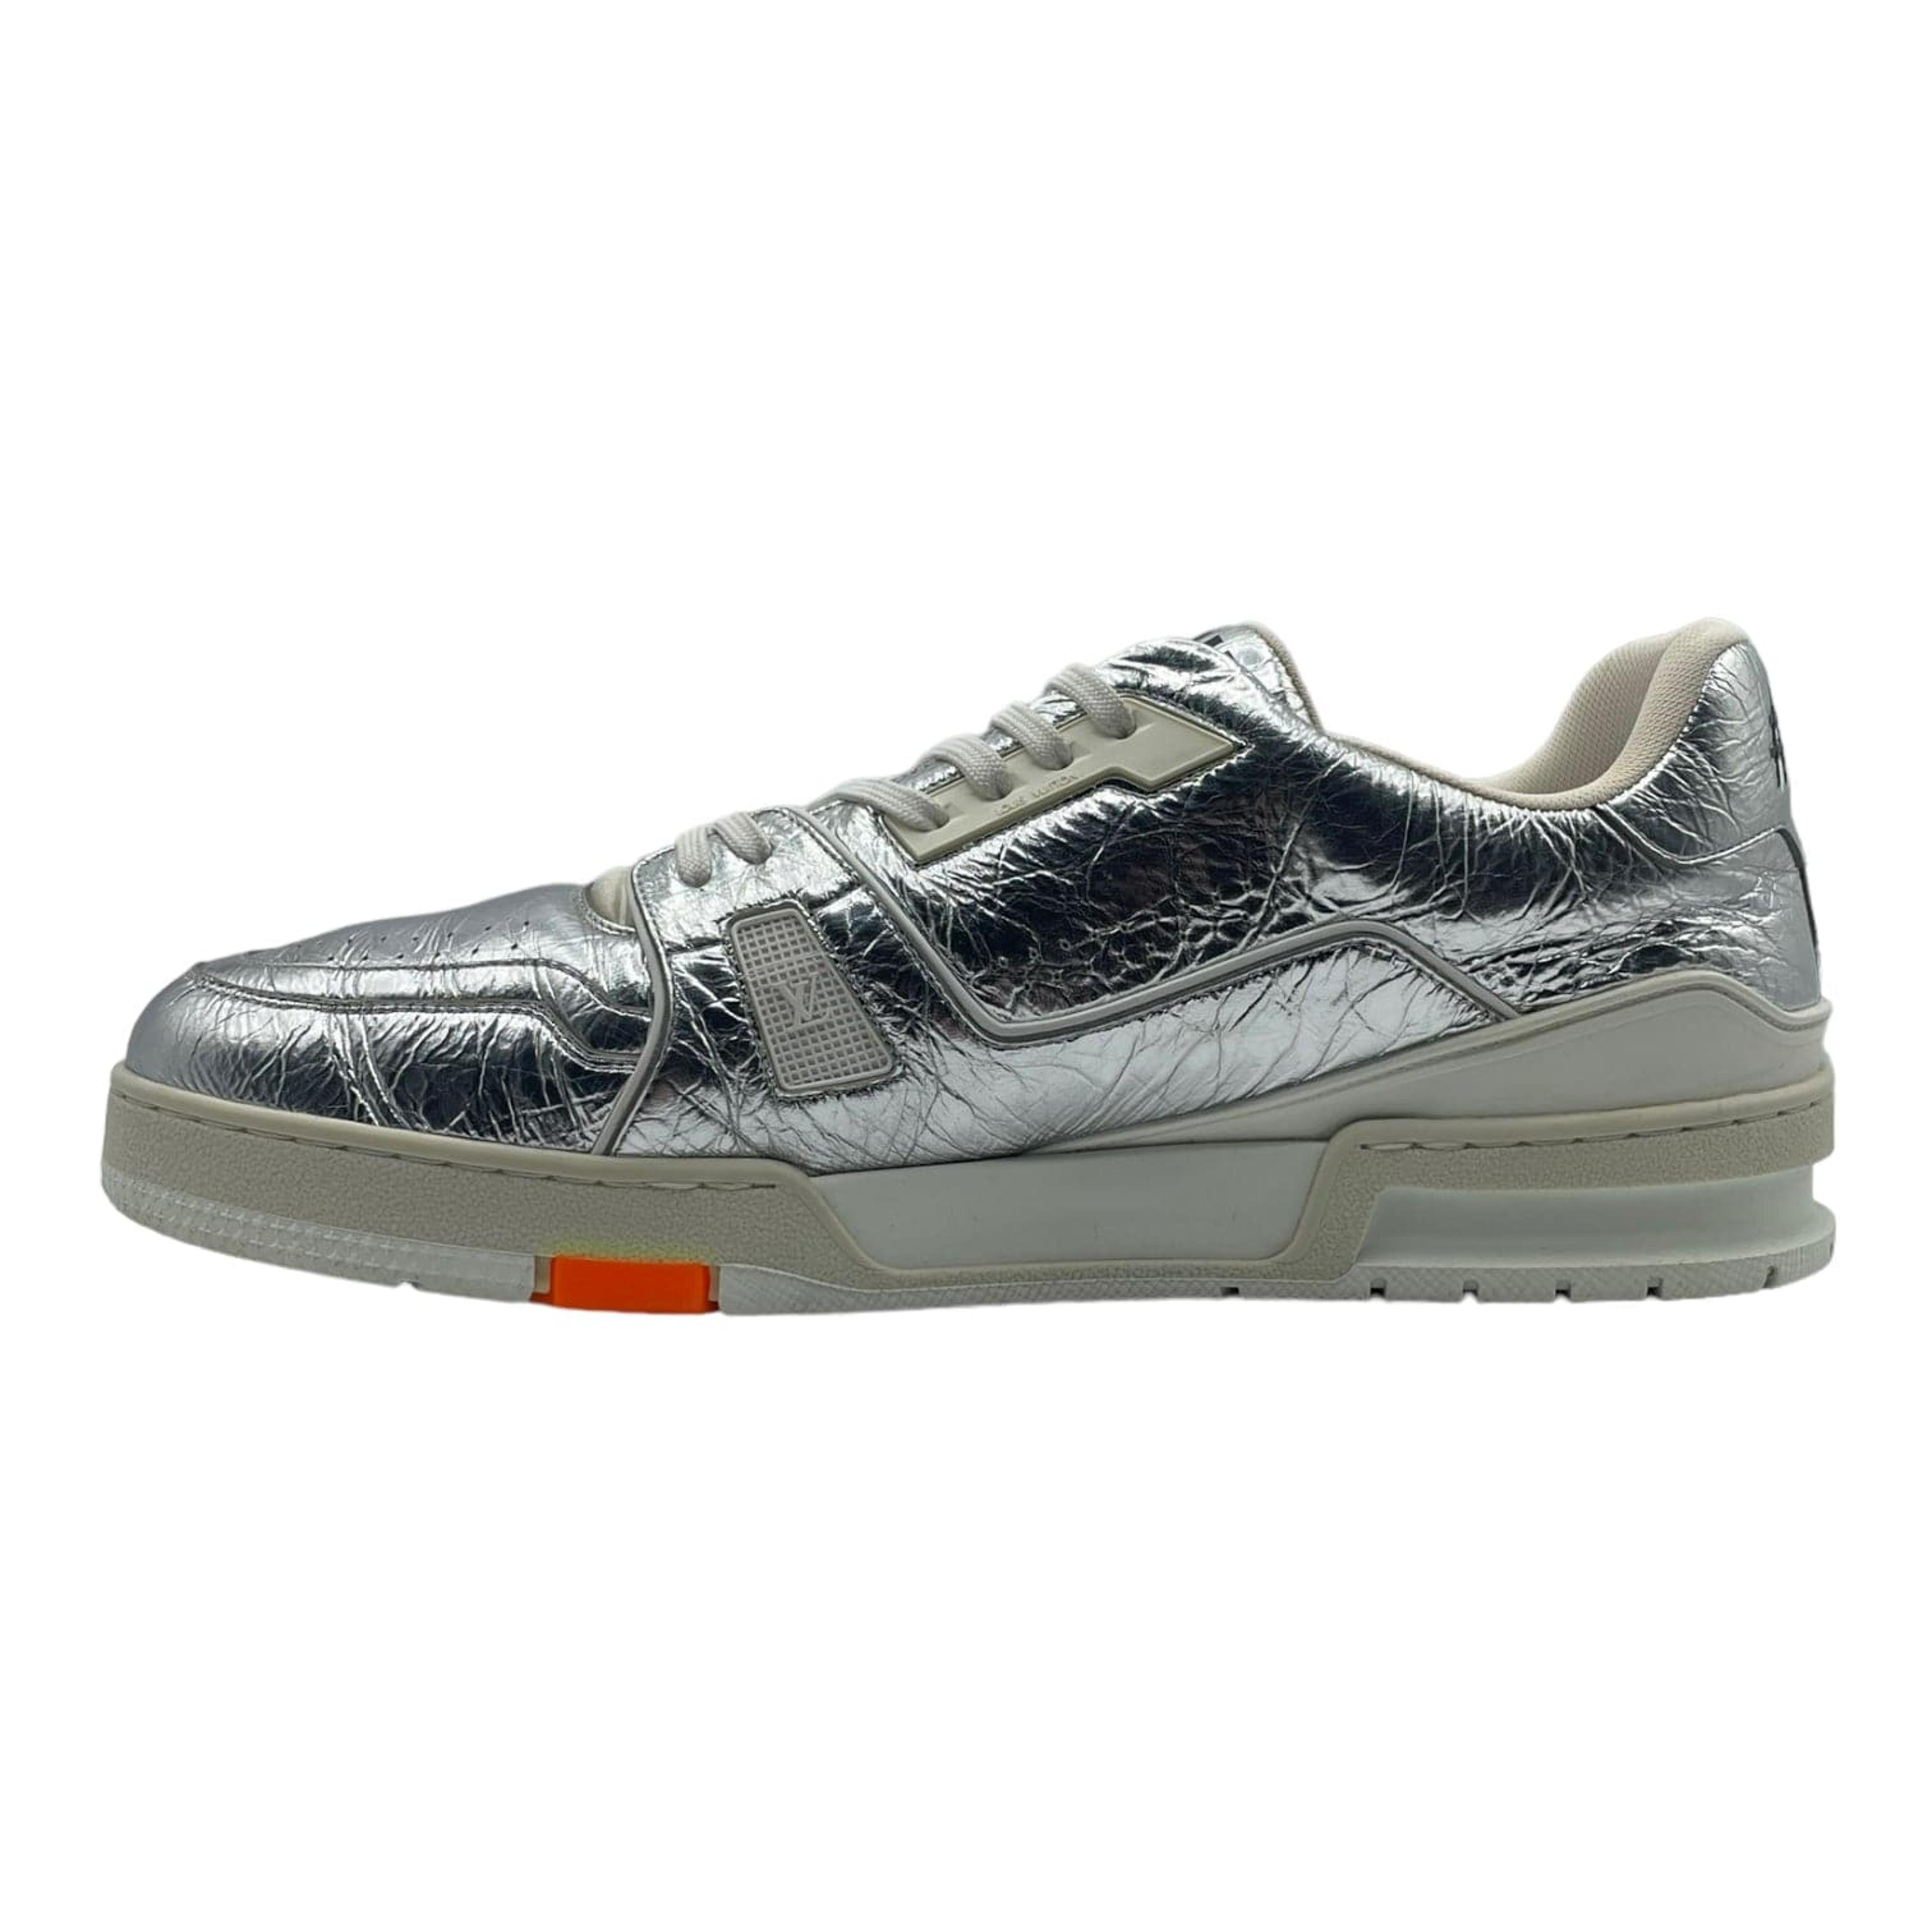 Louis Vuitton Trainers, Pre-Owned